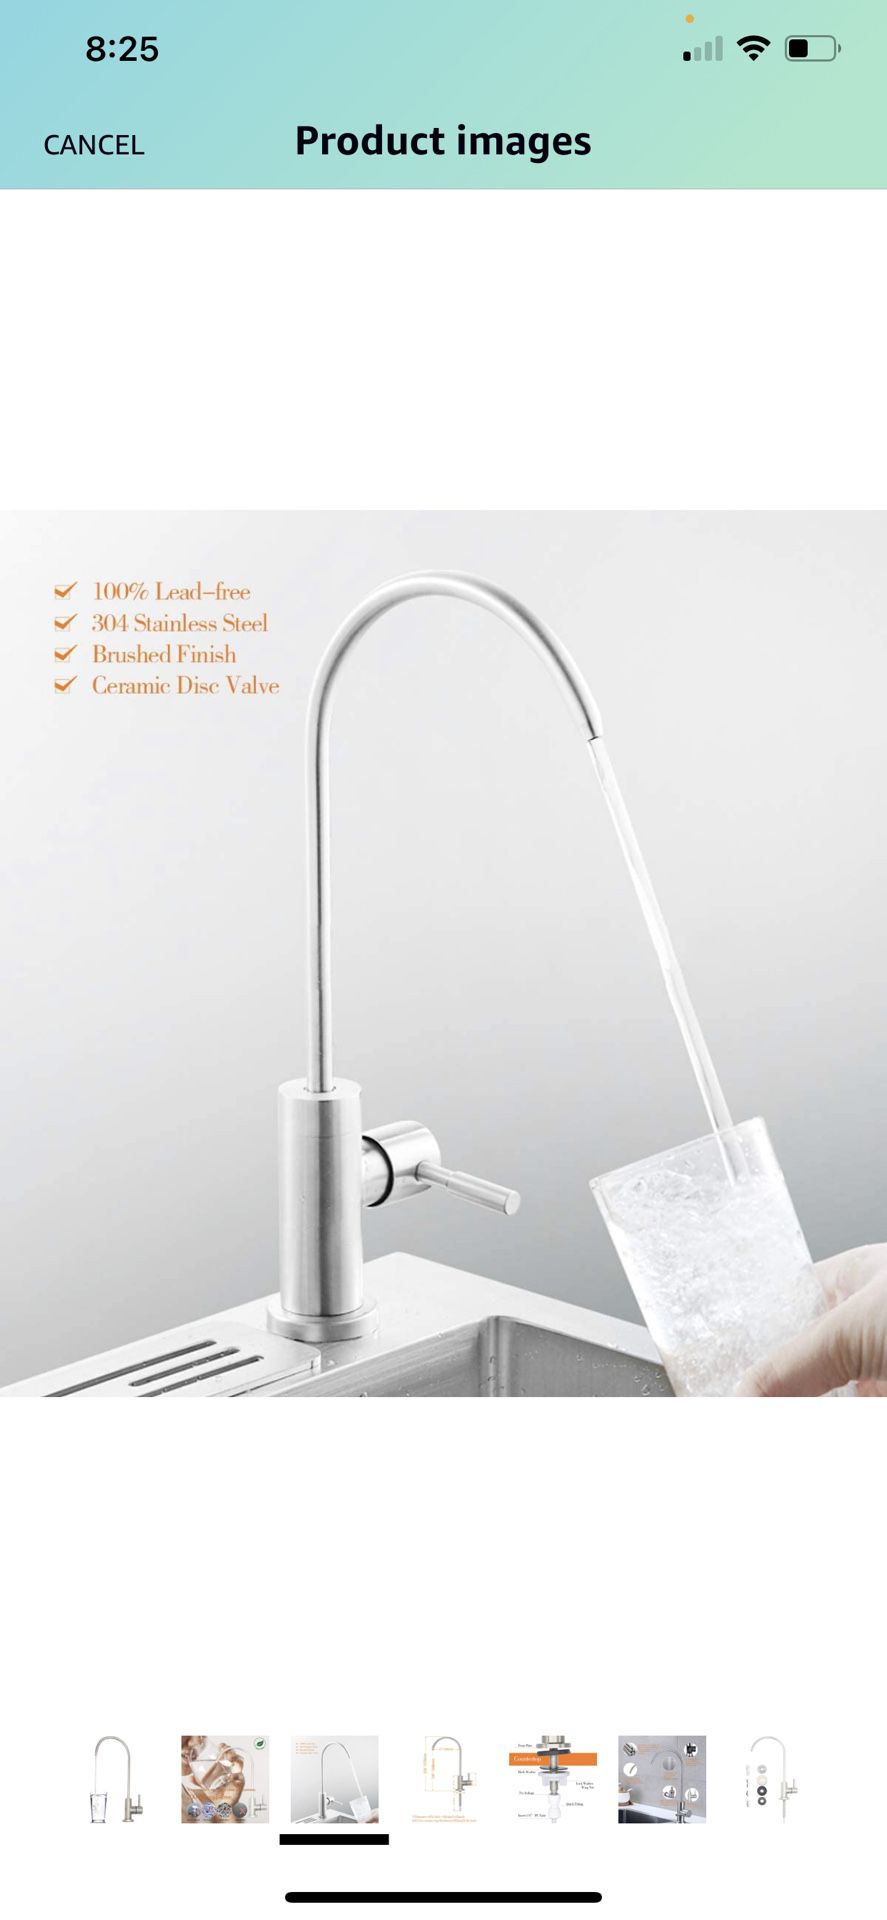 inking Water Faucet 100% Lead-Free Reverse Osmosis Faucet Fits Water Filter or RO System in Non-Air Gap, Stainless Steel 304 Body Brushed Finish